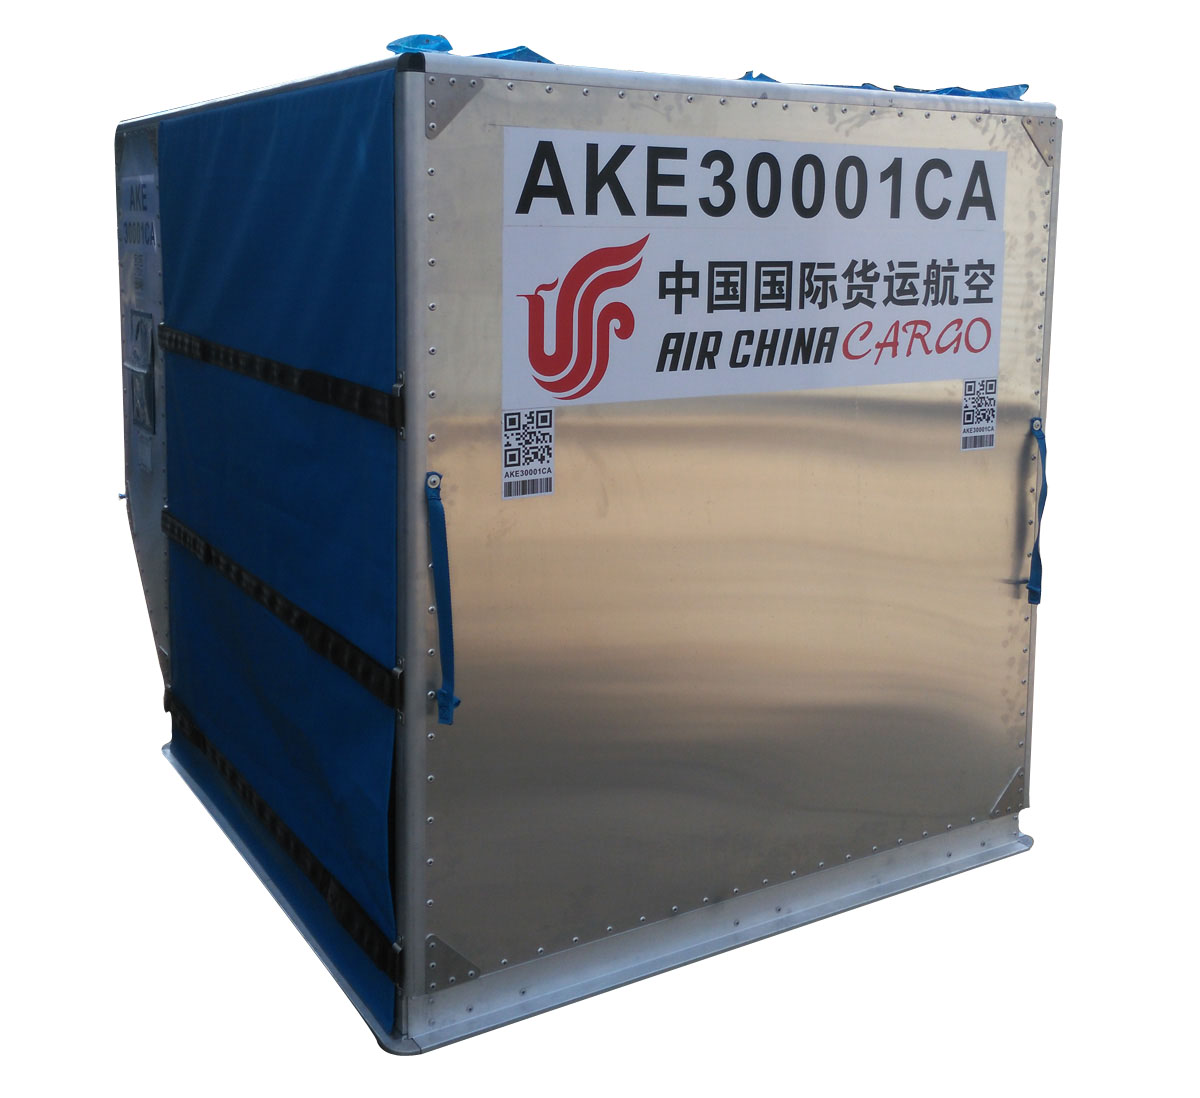 Aviation AKE LD3 container